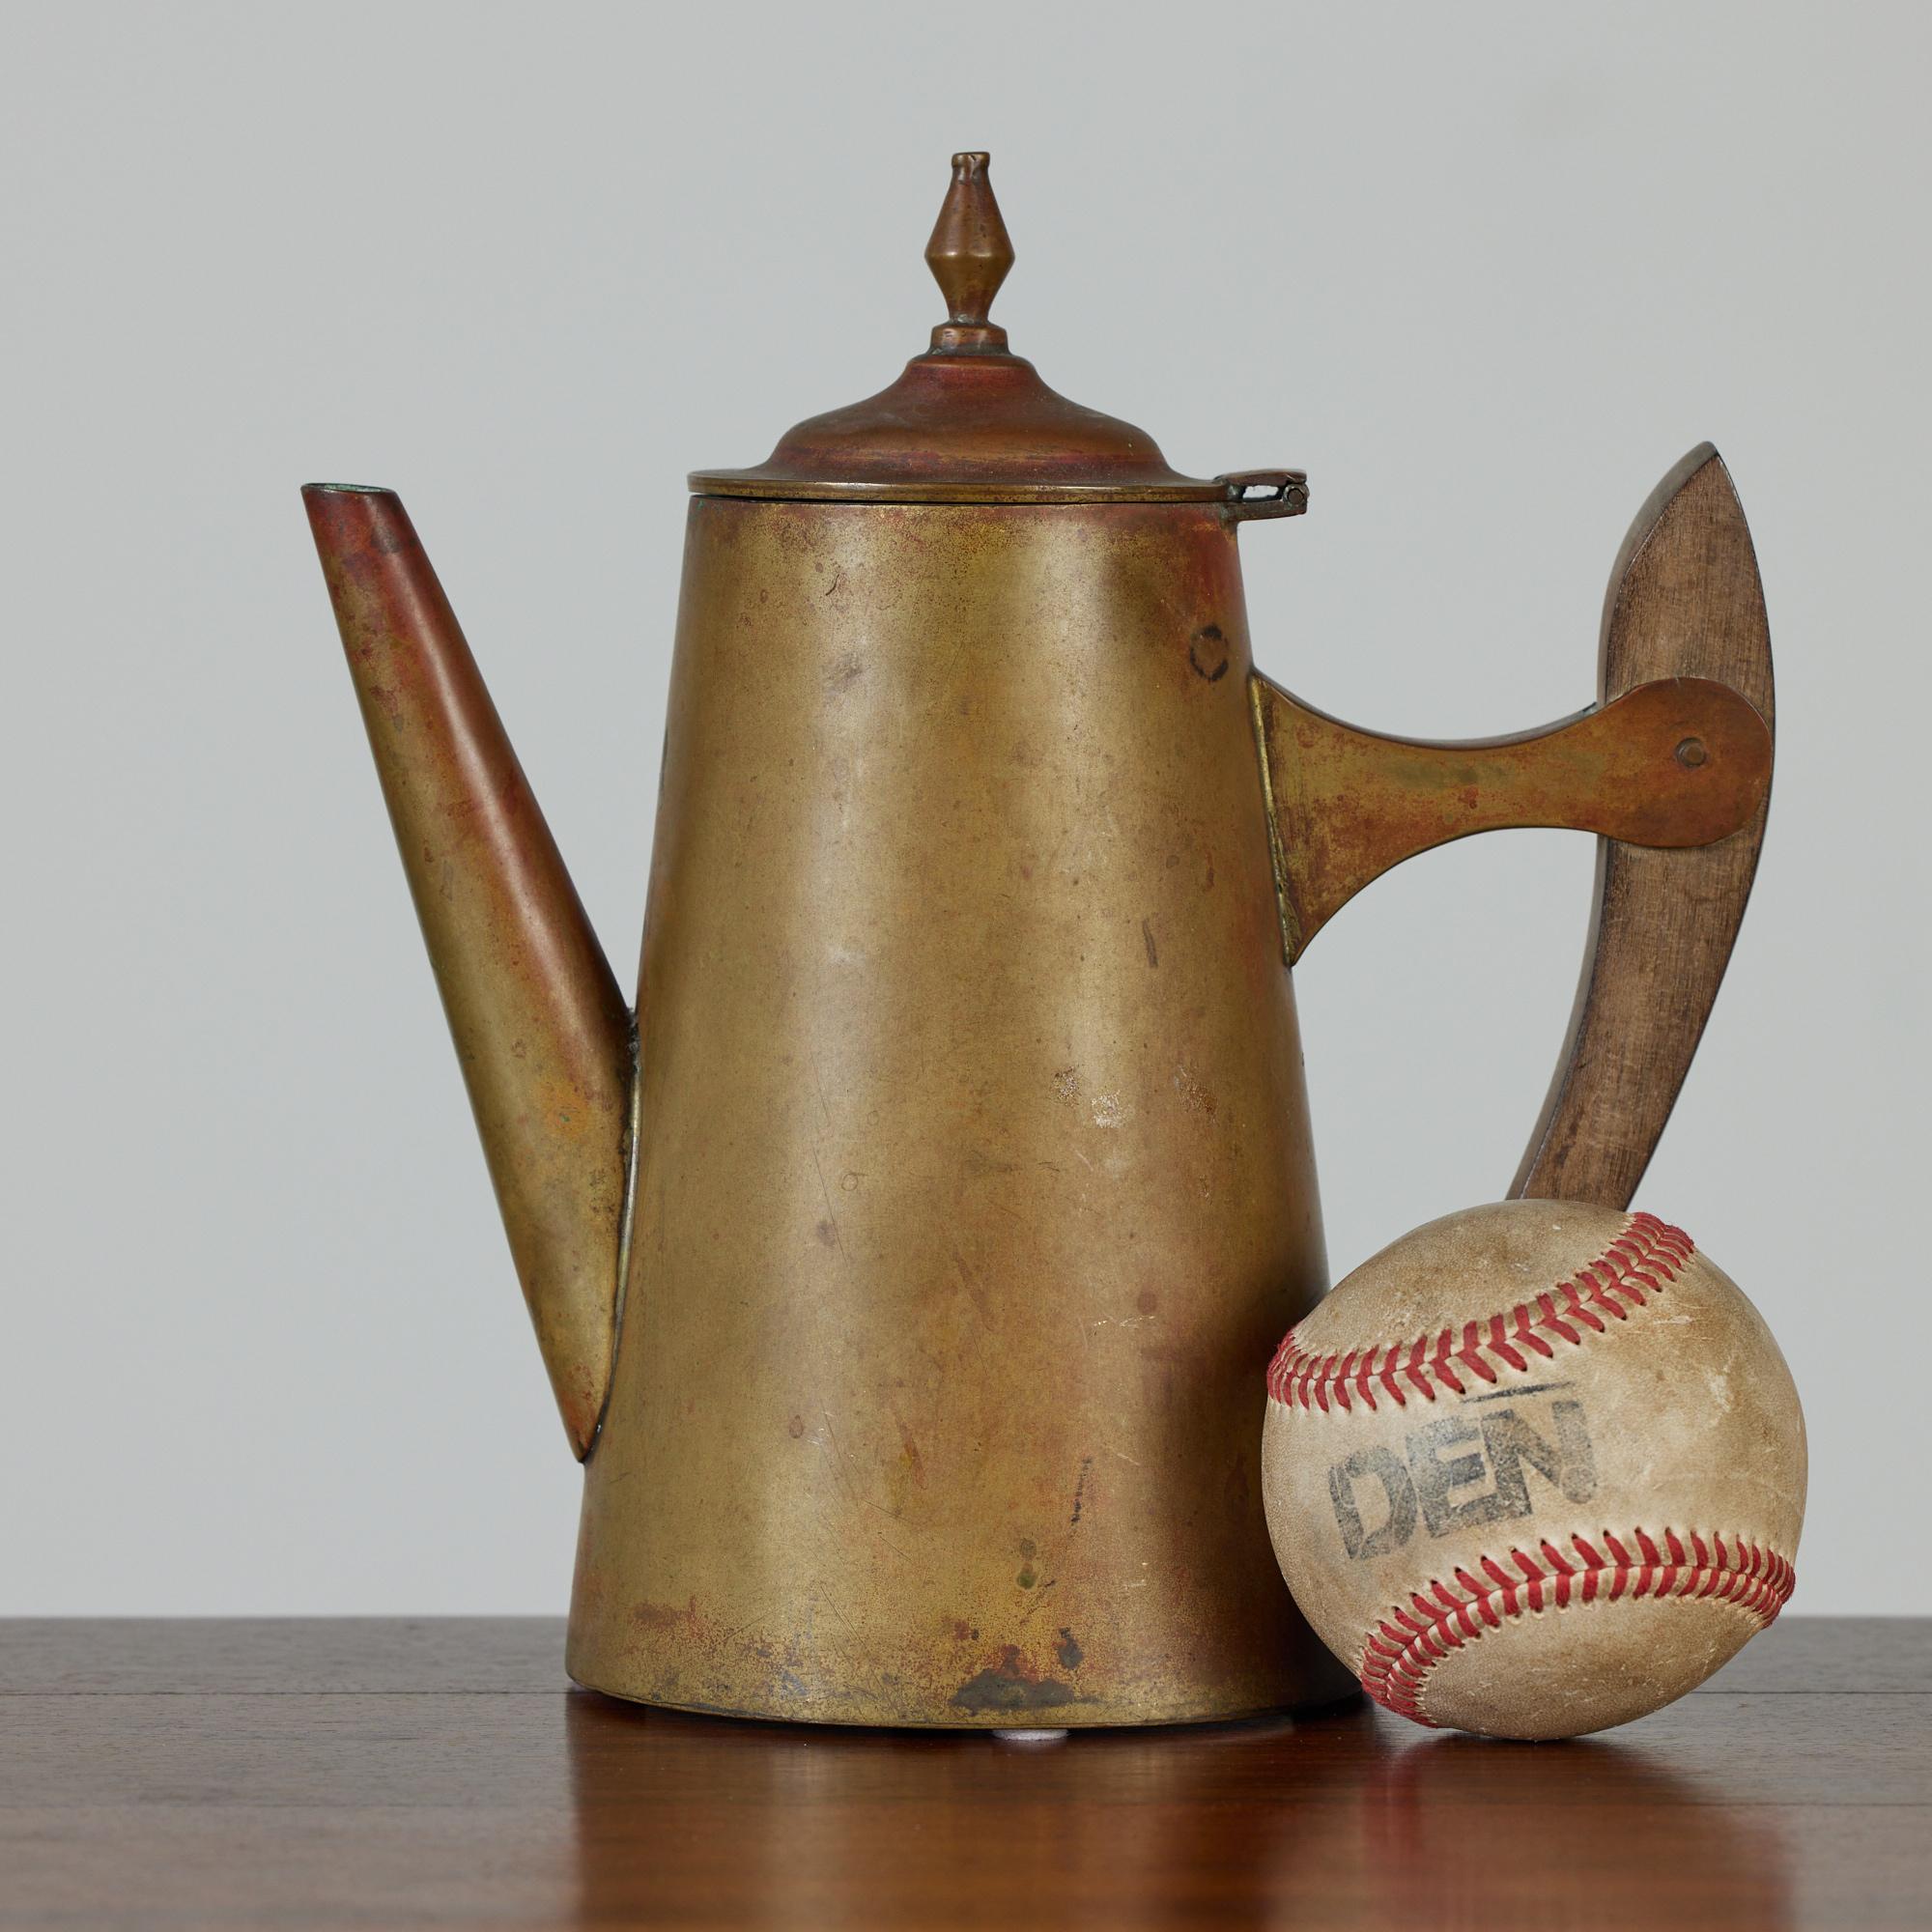 This tall teapot features a gorgeous patinated brass and a sculptural weathered wood handle. The hinged lid has a diamond shaped spindle on its top. The pot would be a lovely collectible to add to your kitchen décor or any shelf needing a little